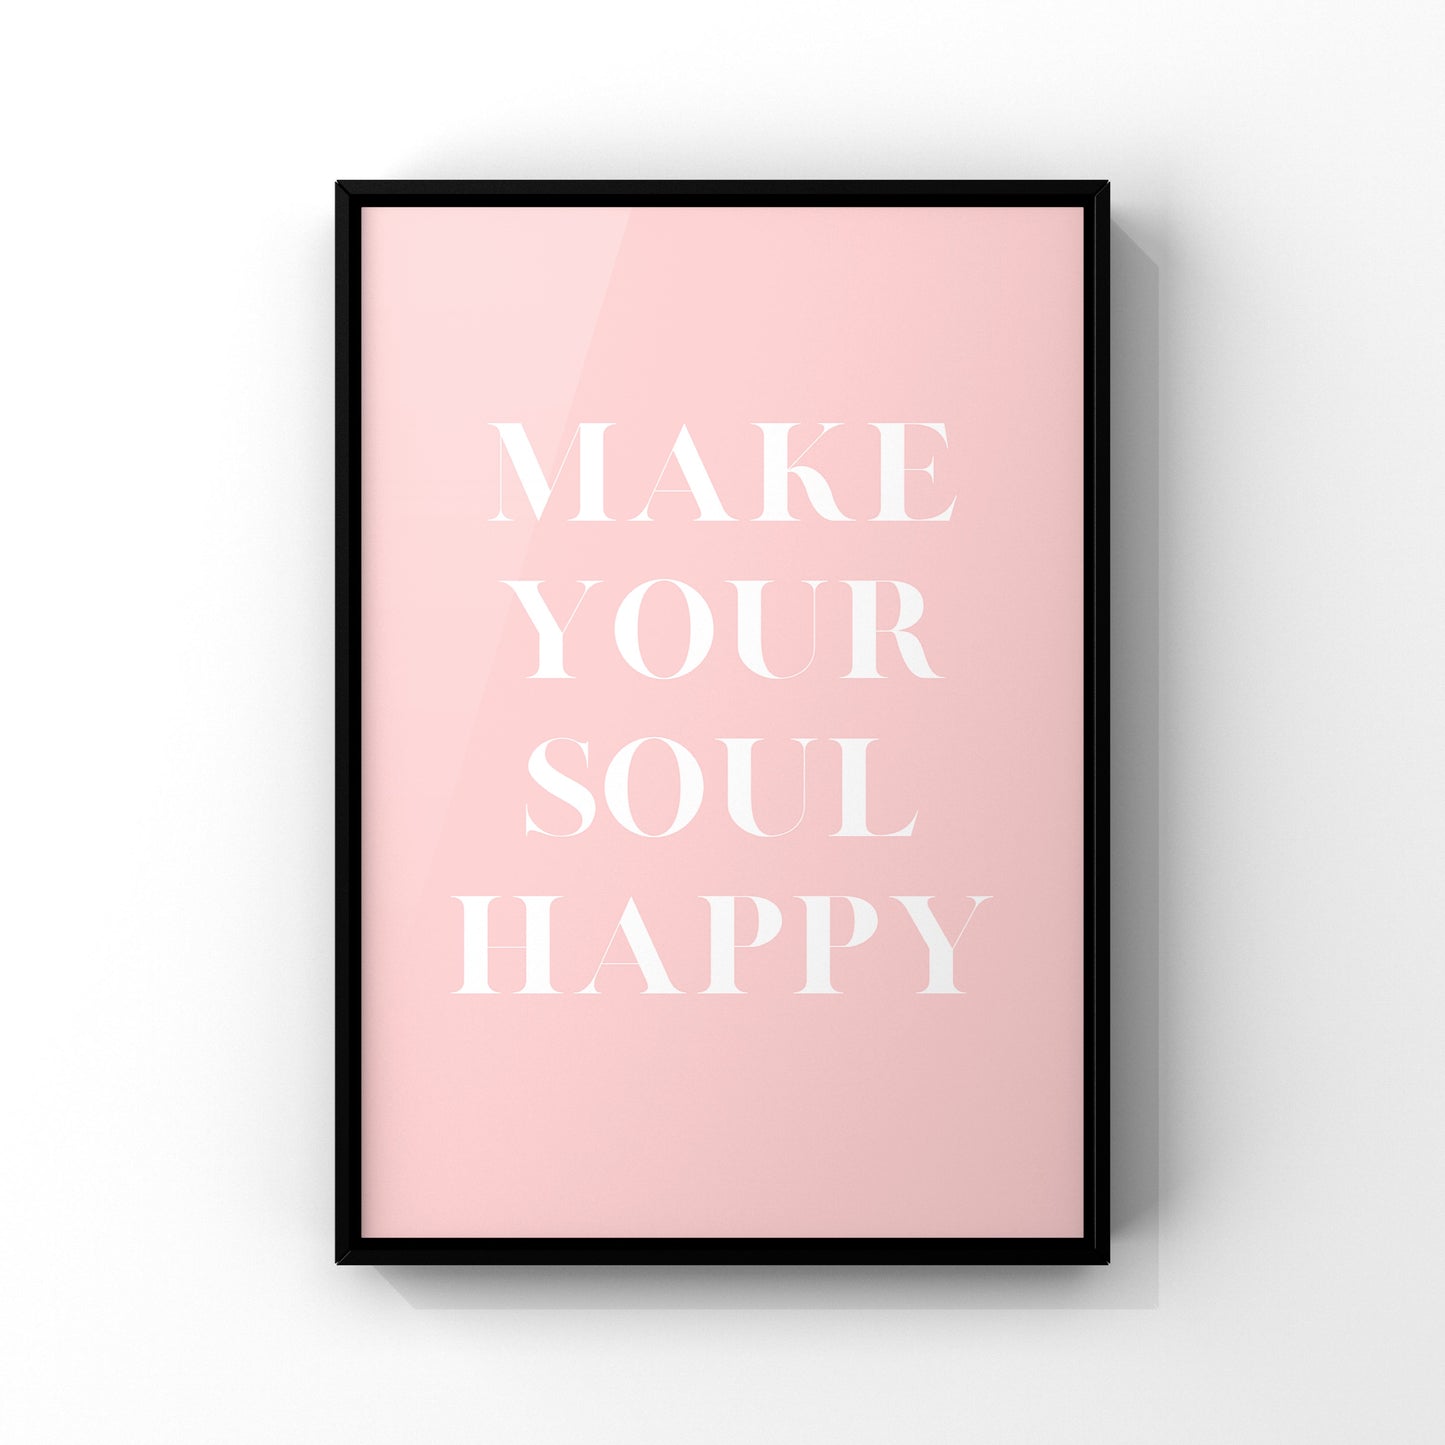 Make your soul happy